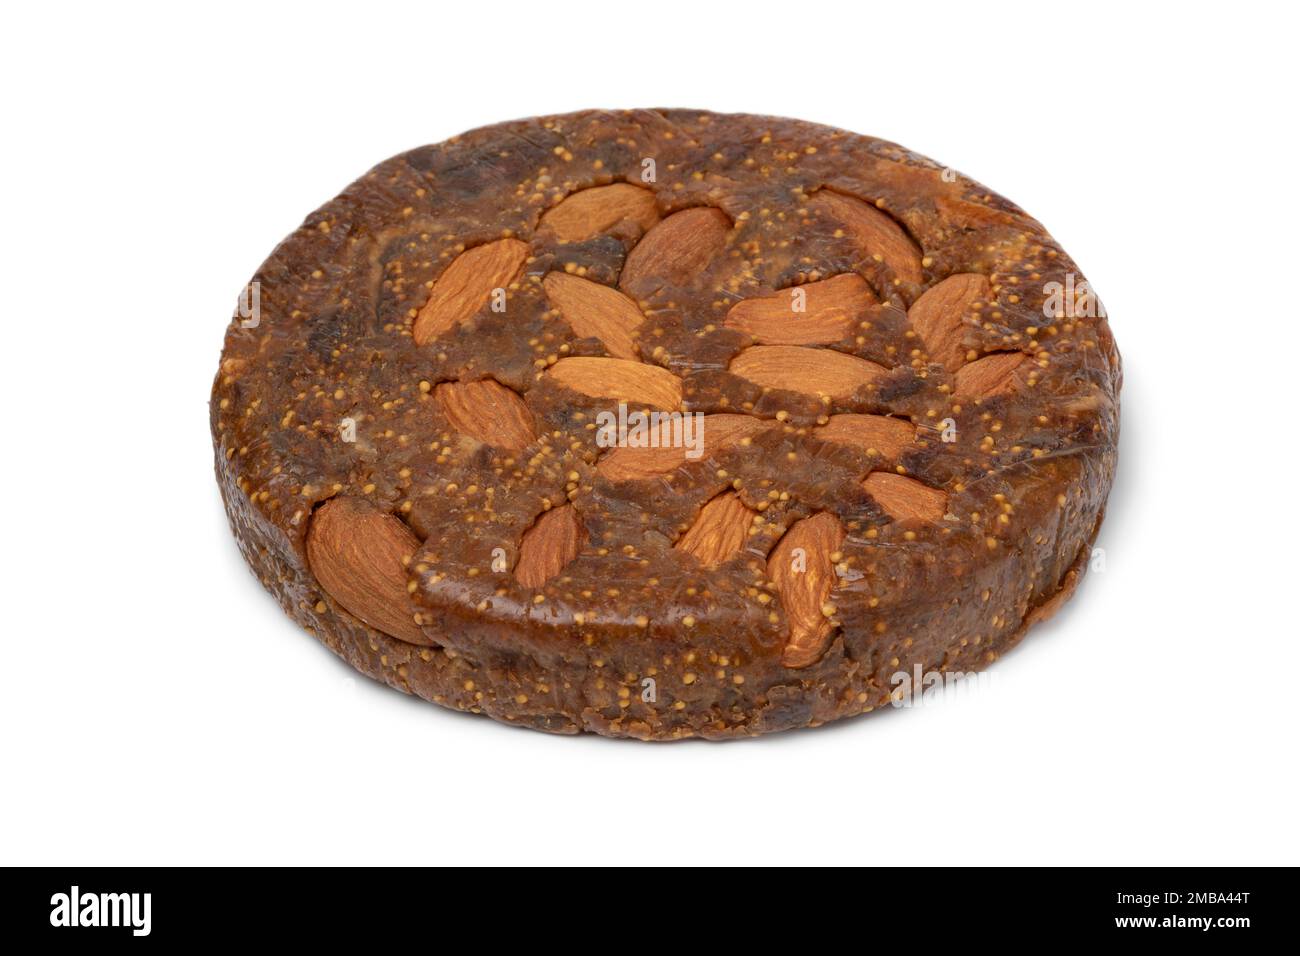 Single round fig bread with almonds isolated on white background Stock Photo